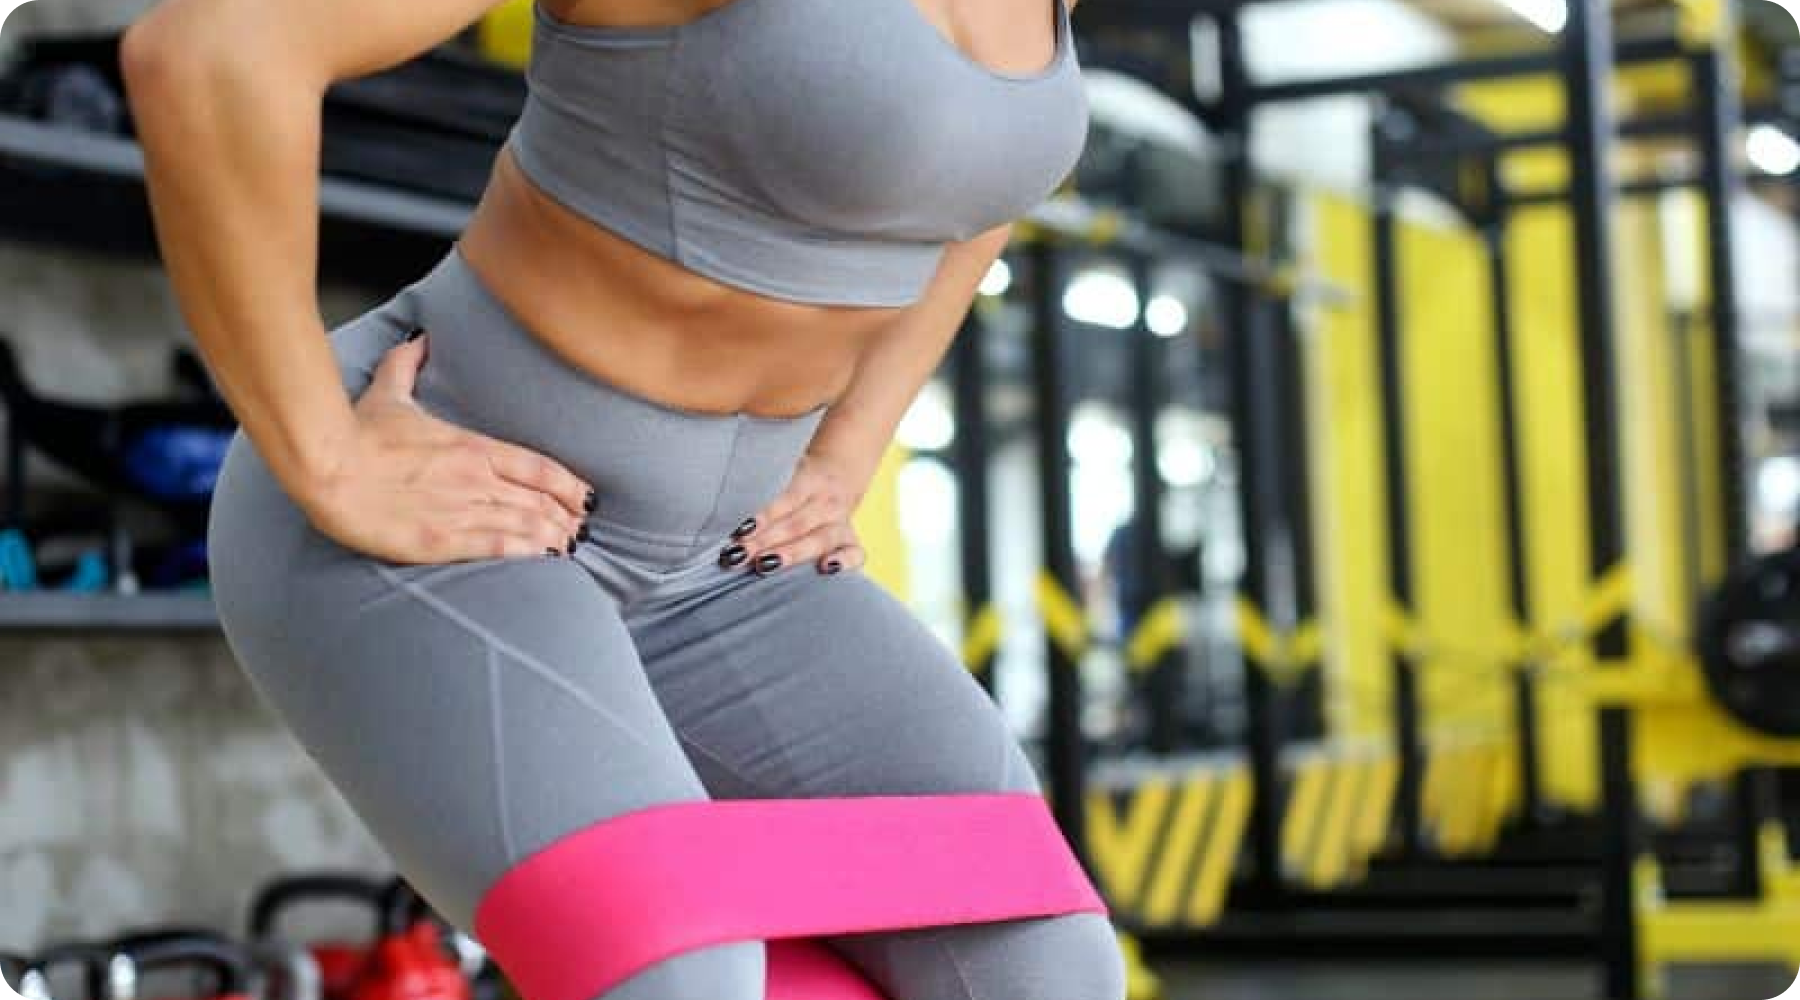 How to Use Fabric Resistance Bands For Massive Glute Growth